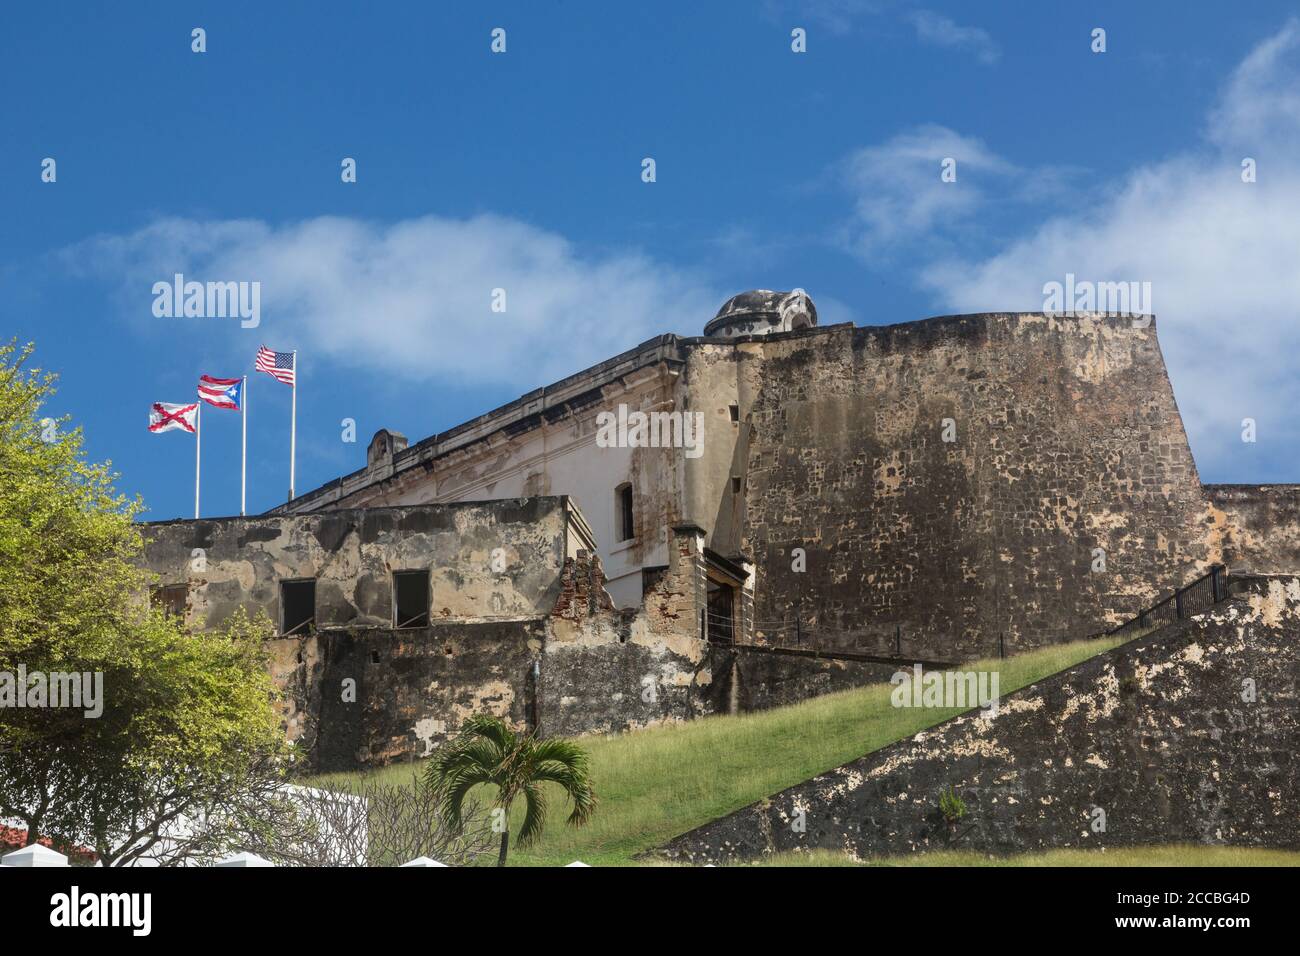 Castillo San Cristobal, part of the defenses of Old San Juan, Puerto Rico, was the largest European fortification ever built in the Americas.  Nationa Stock Photo